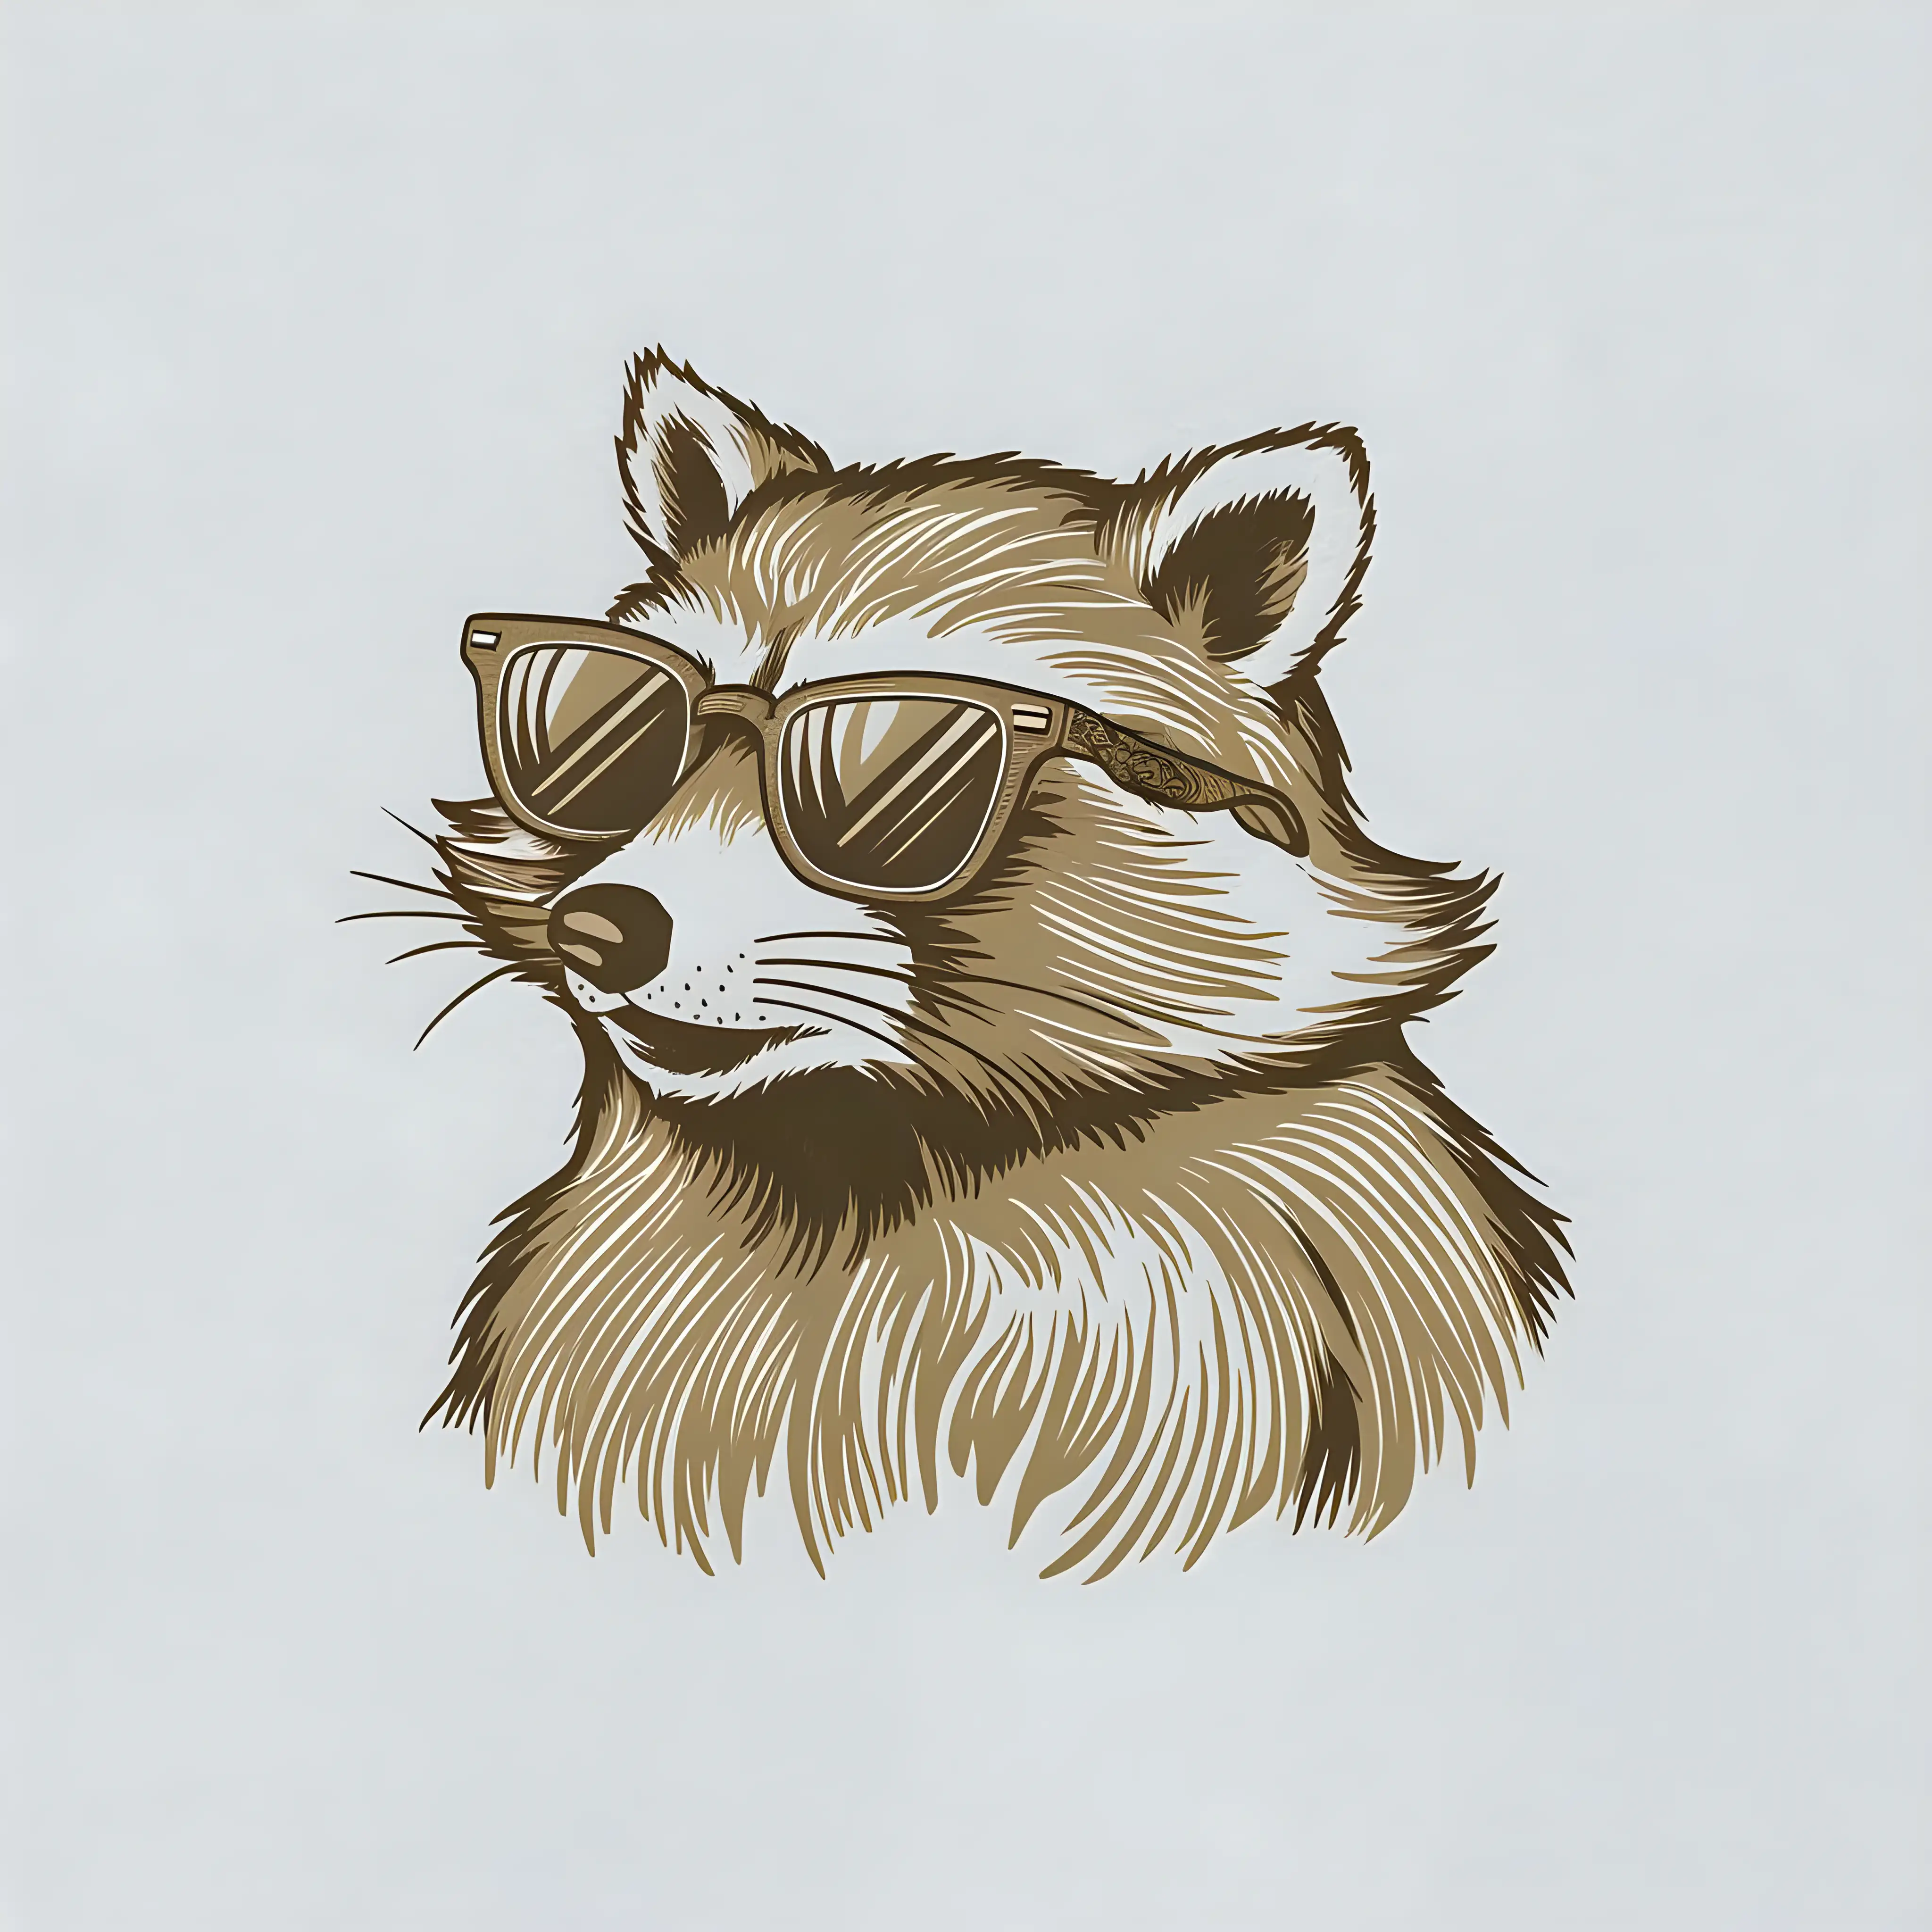 raccoon head sideview clipart with sunglasses on fine line art vintage looks on white background
